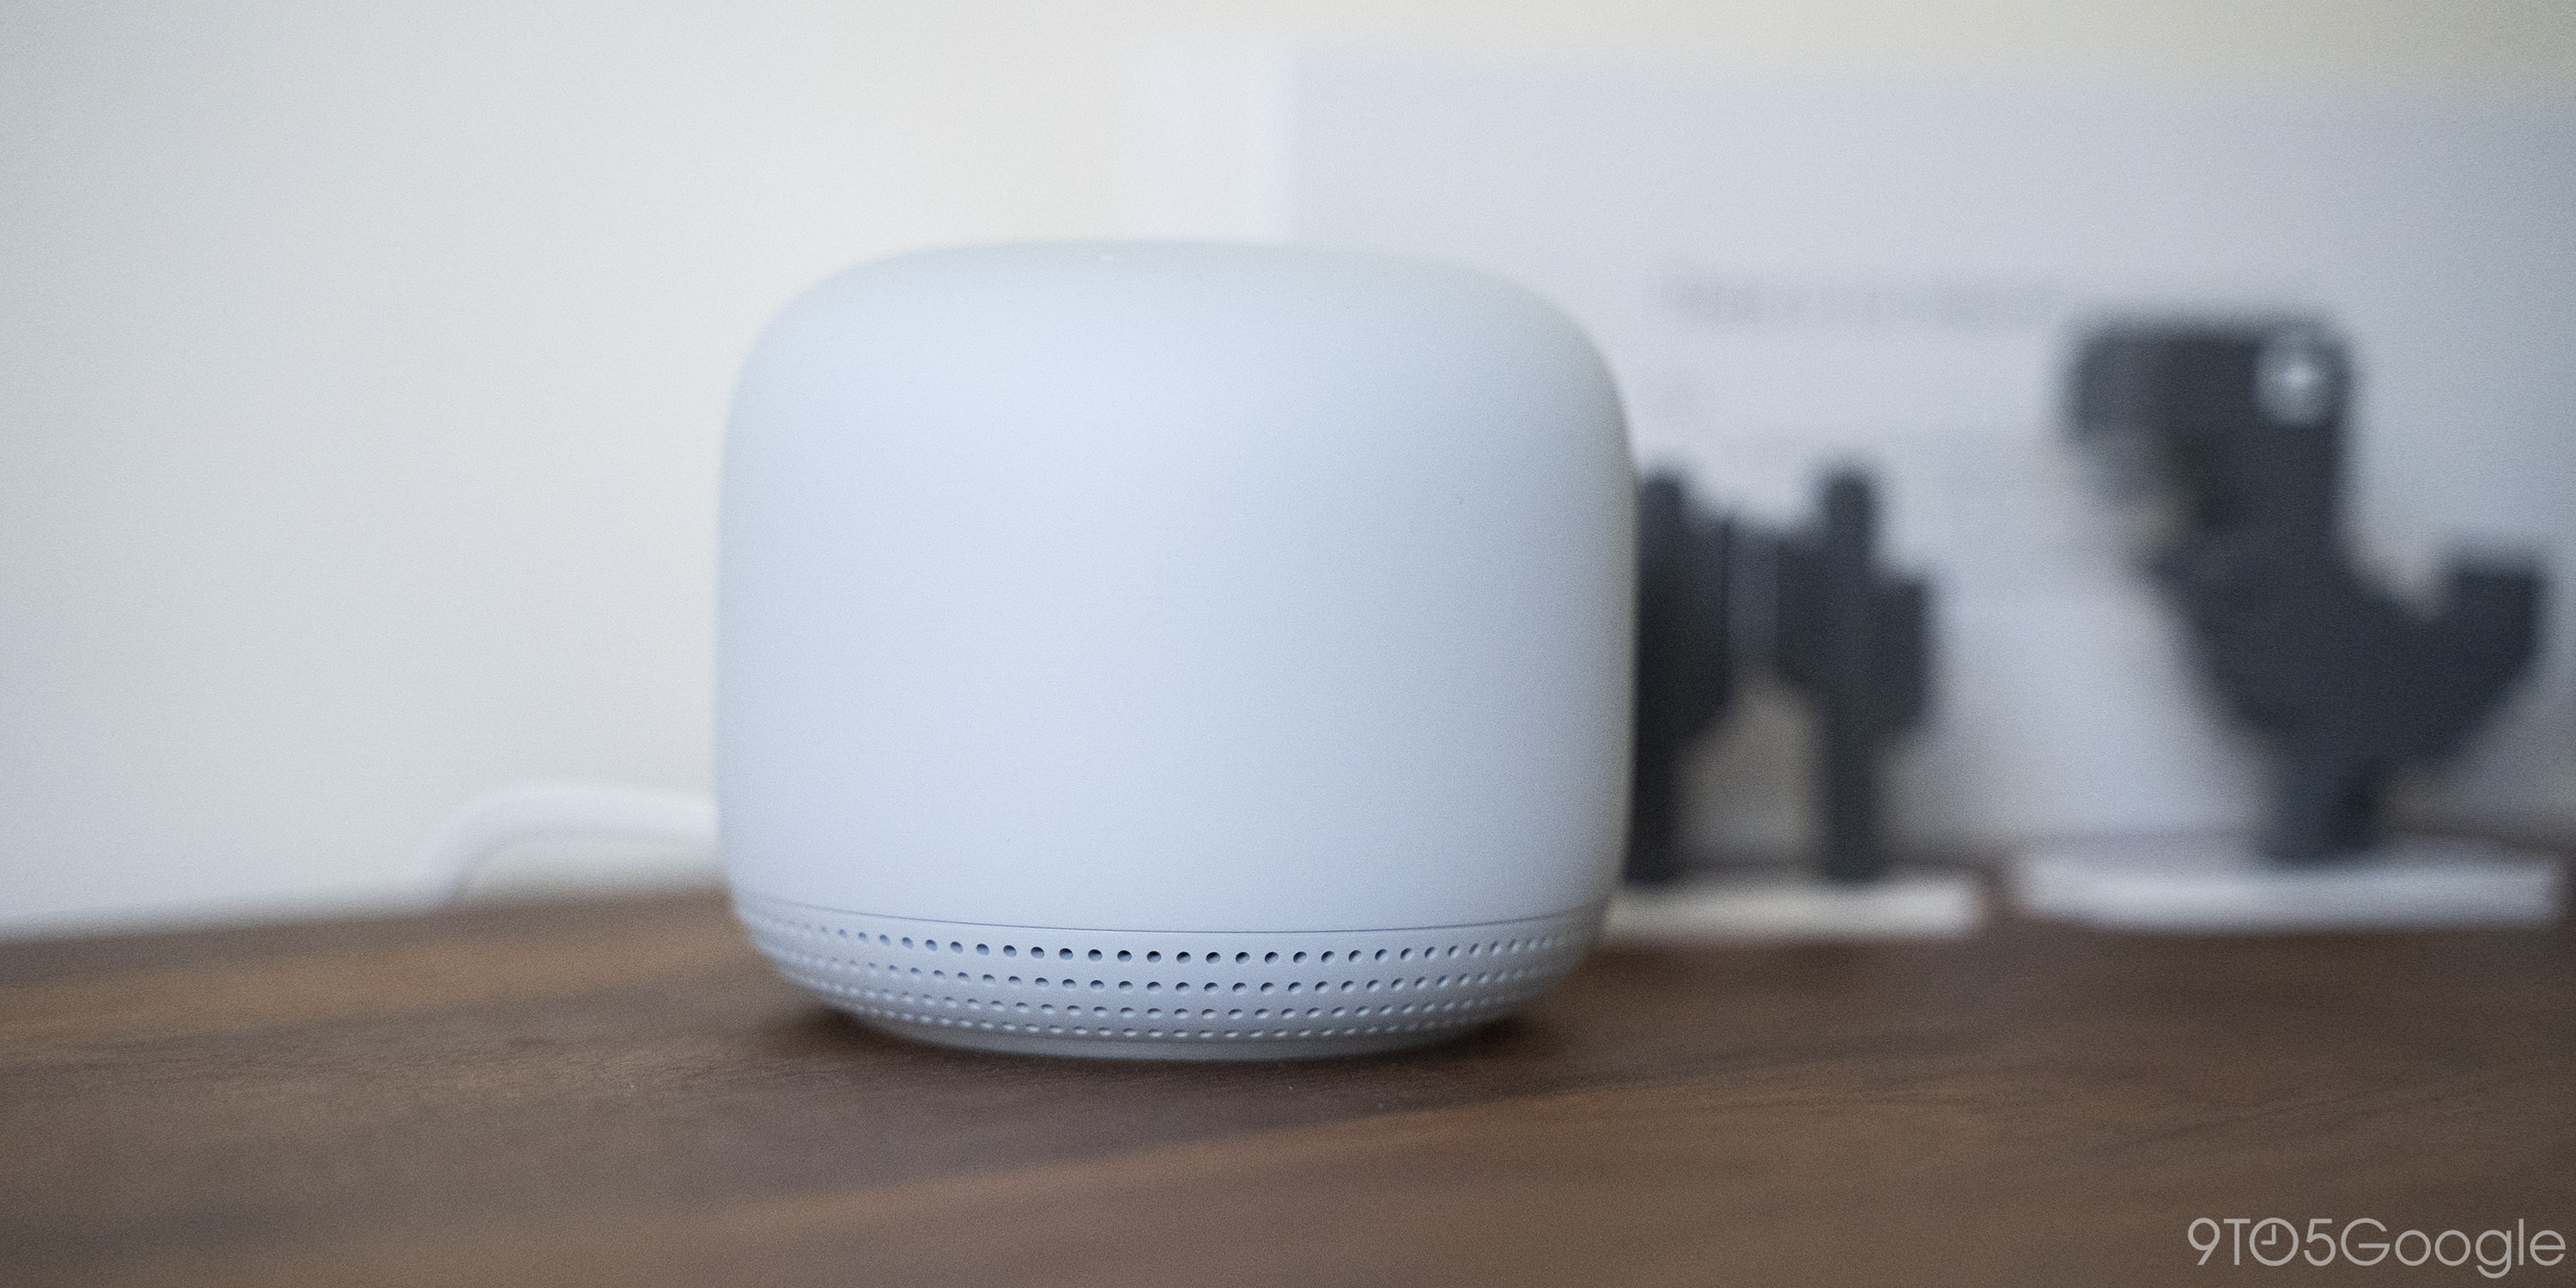 Google Nest Wifi (3-pack) Wireless Router Review - Consumer Reports